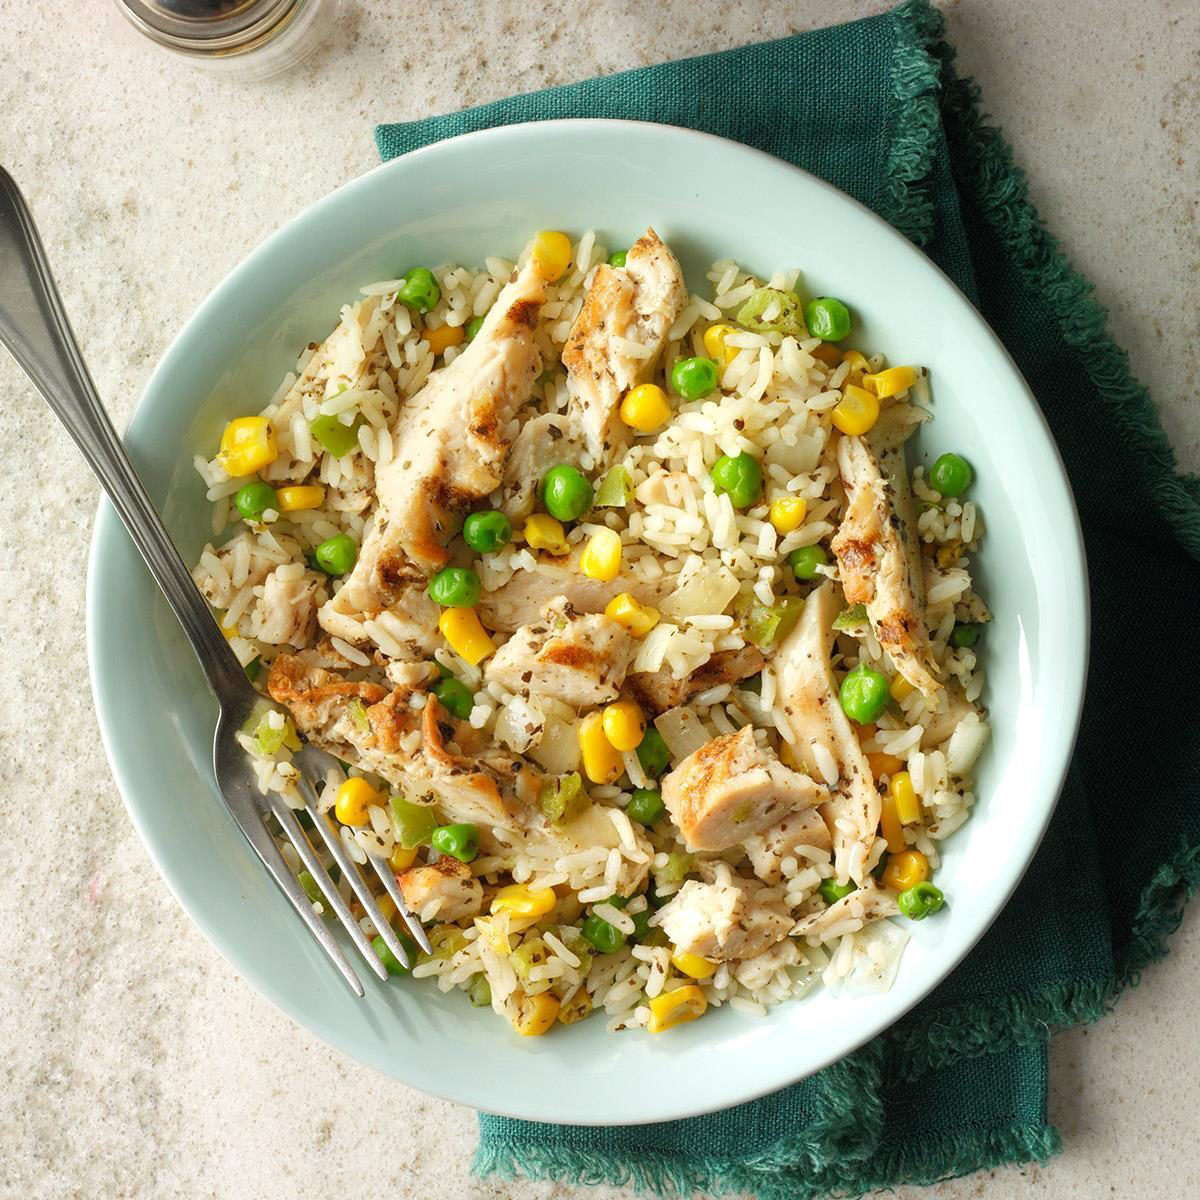 80 Low-Calorie Dinner Recipes Ready in 30 Minutes